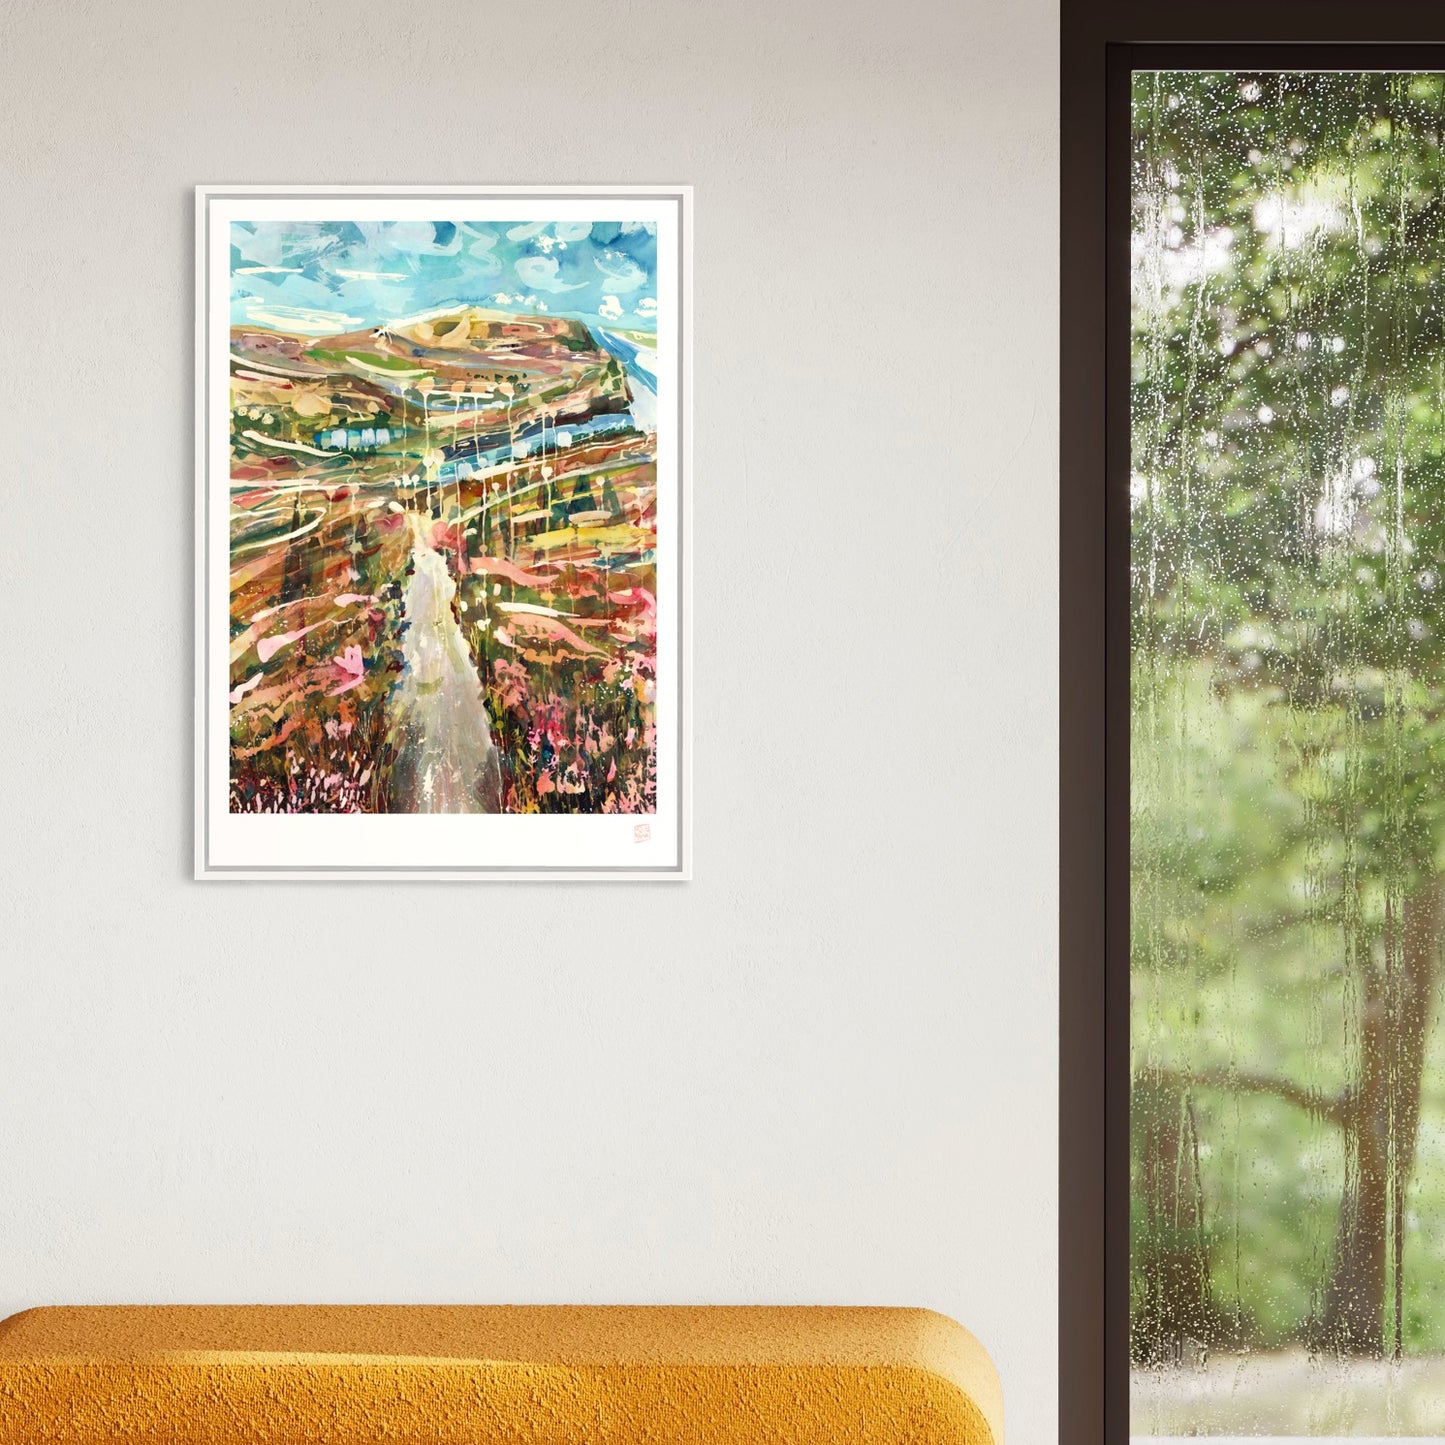 New A1 | A2 Limited Edition Print - The Way is Grateful